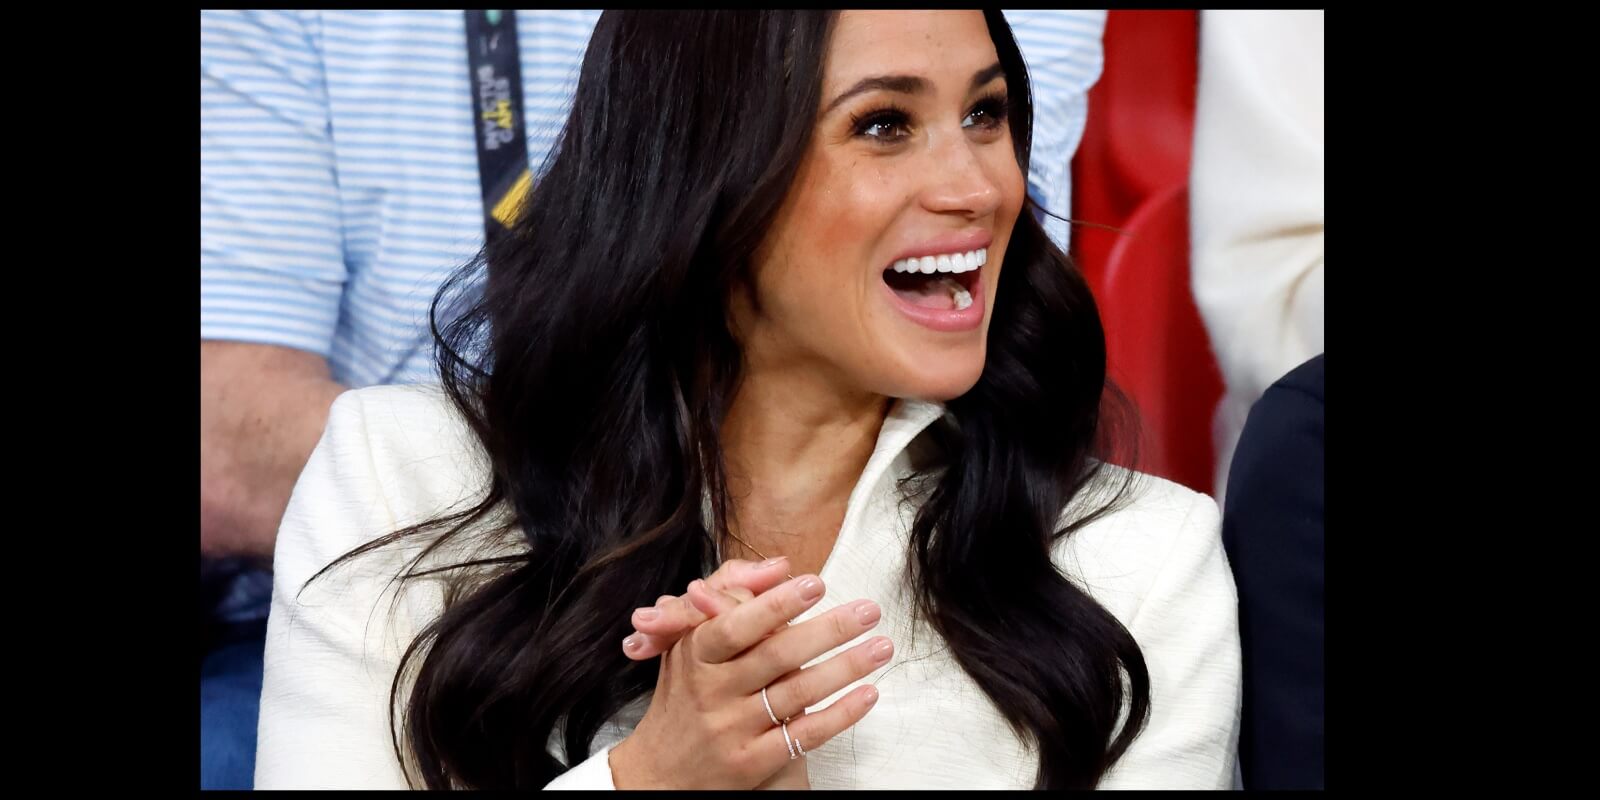 Meghan Markle wears 1972 Tennis Pinky Ring at the Invictus Games 2020 at Zuiderpark on April 17, 2022 in The Hague, Netherlands.